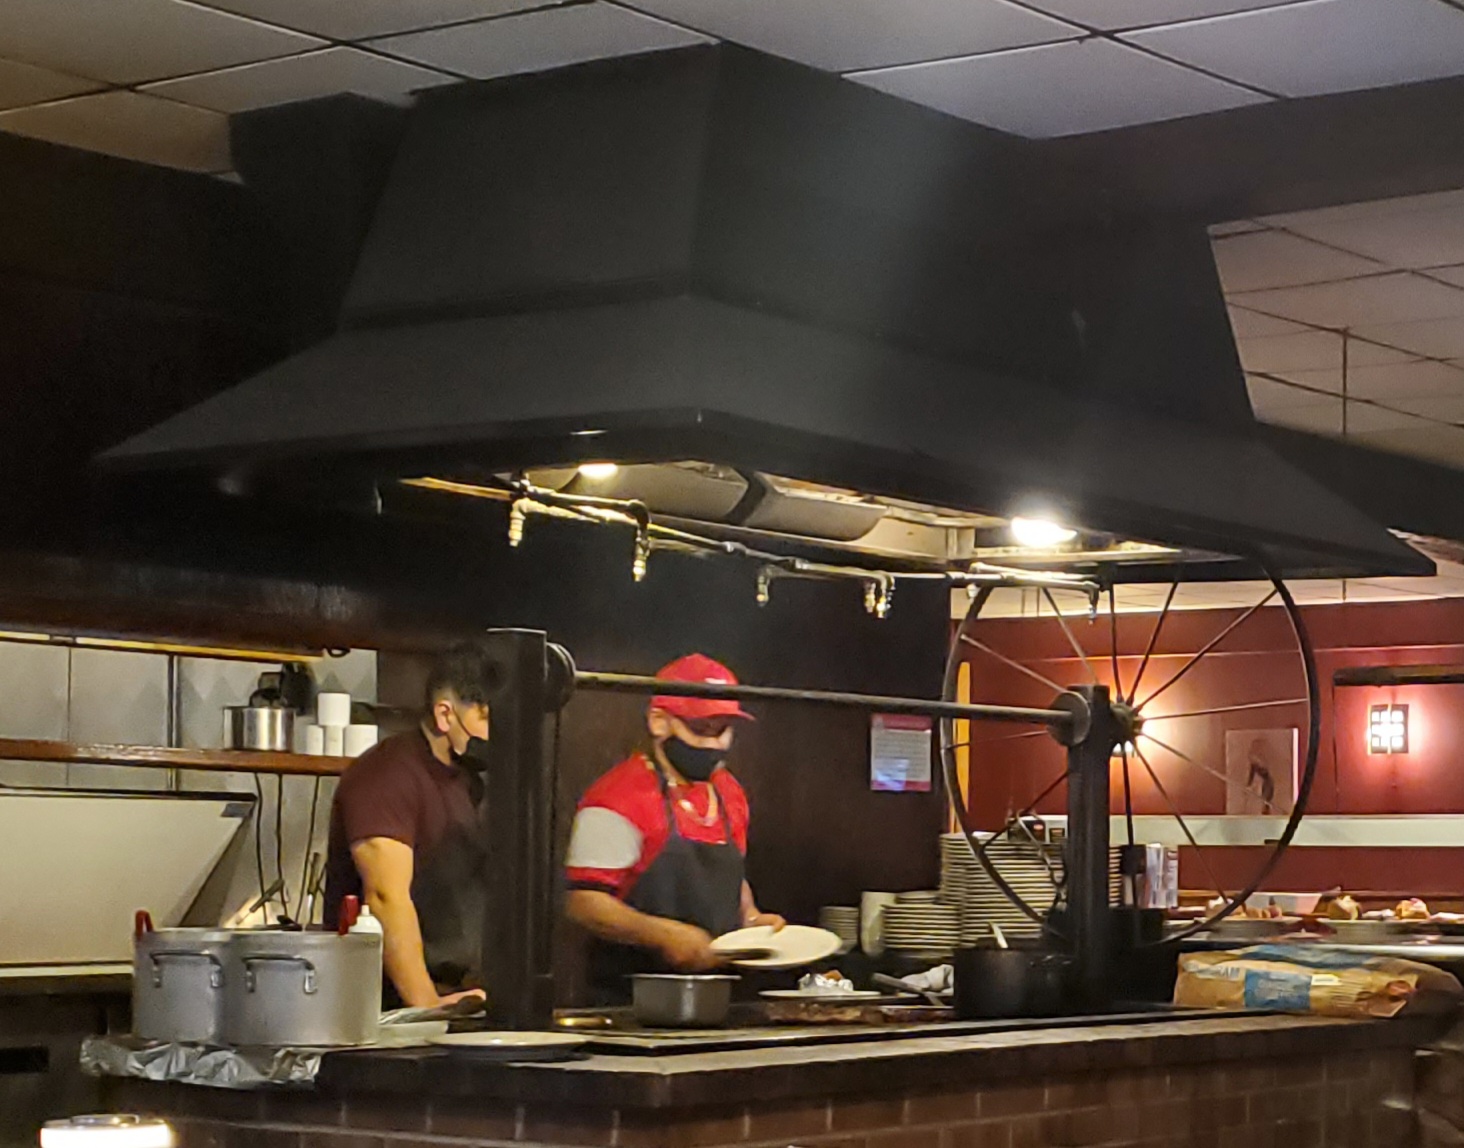 An open grill inside Possum Trot has two masked staff cooking food. Photo by Carl Busch.